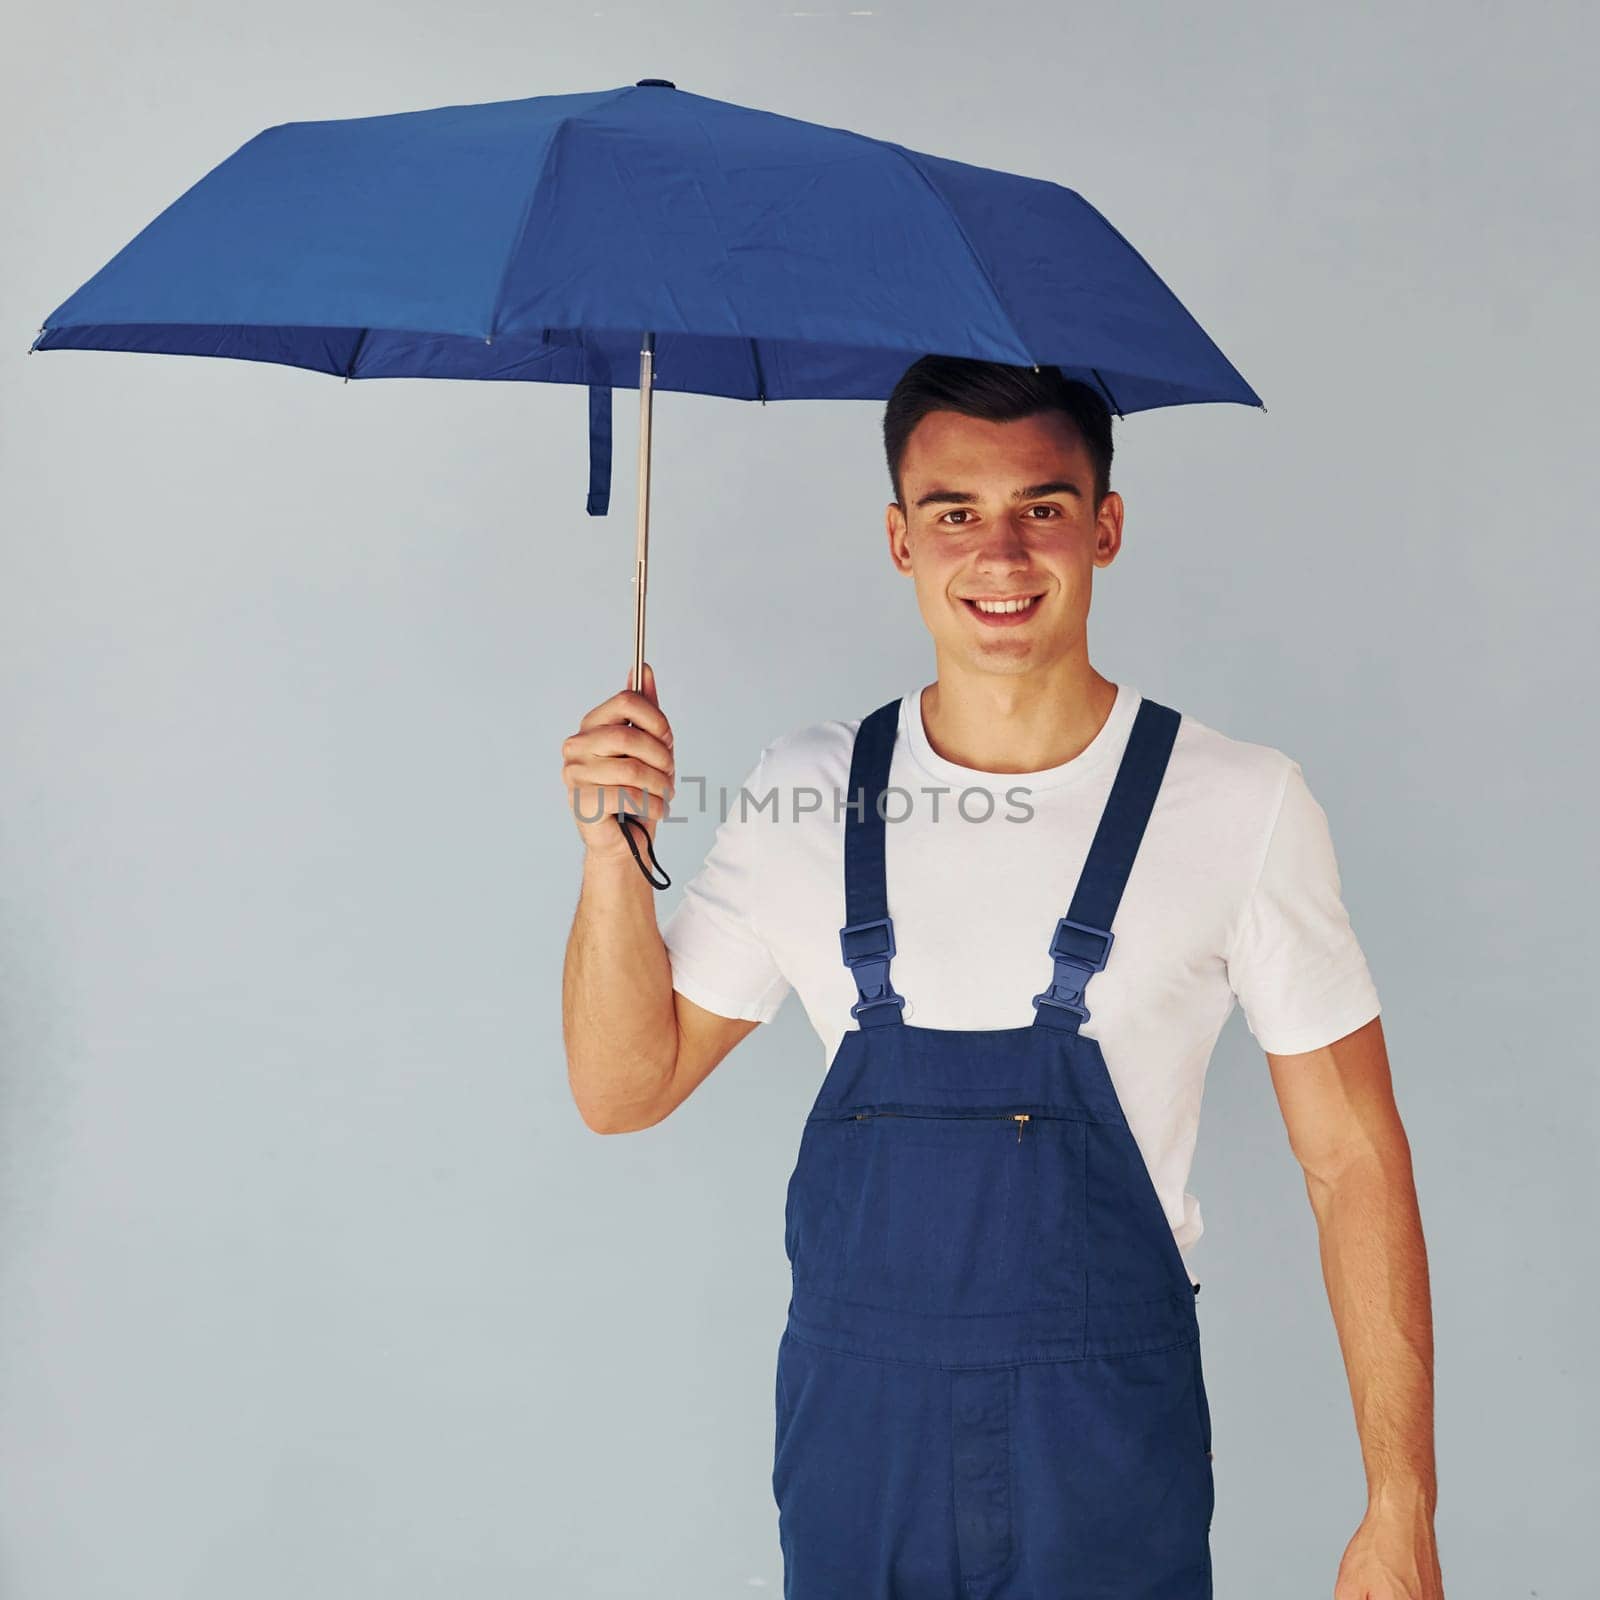 Holds umbrella by hand. Male worker in blue uniform standing inside of studio against white background.